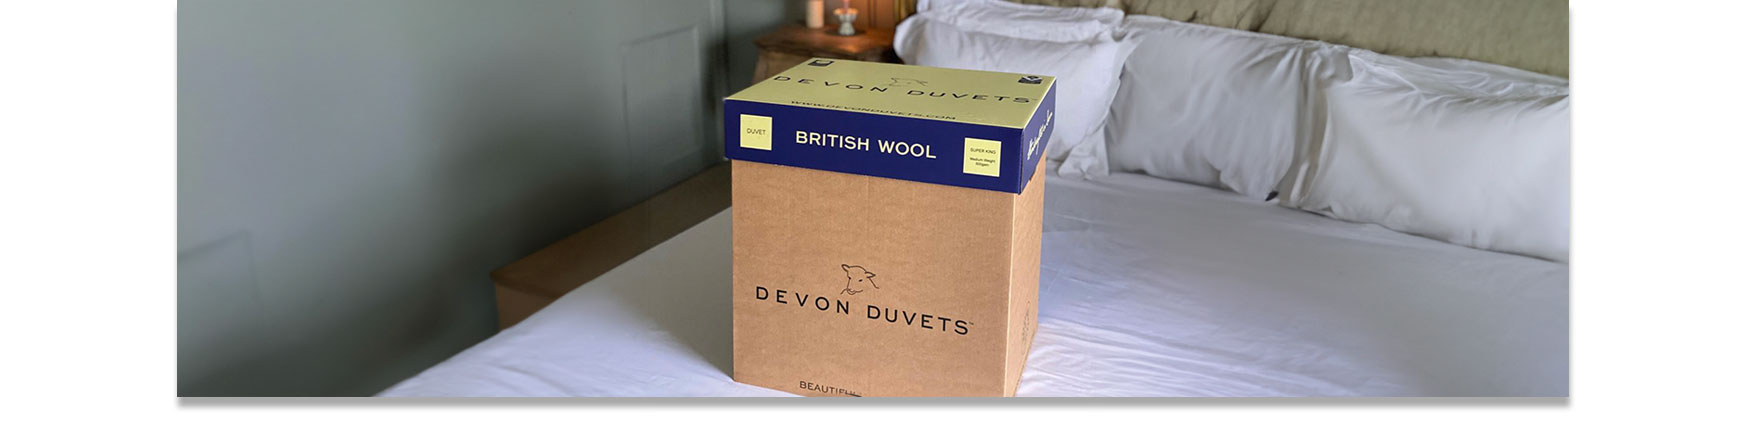 Pristine Devon Duvets product showcased in untouched packaging, ensuring cleanliness.